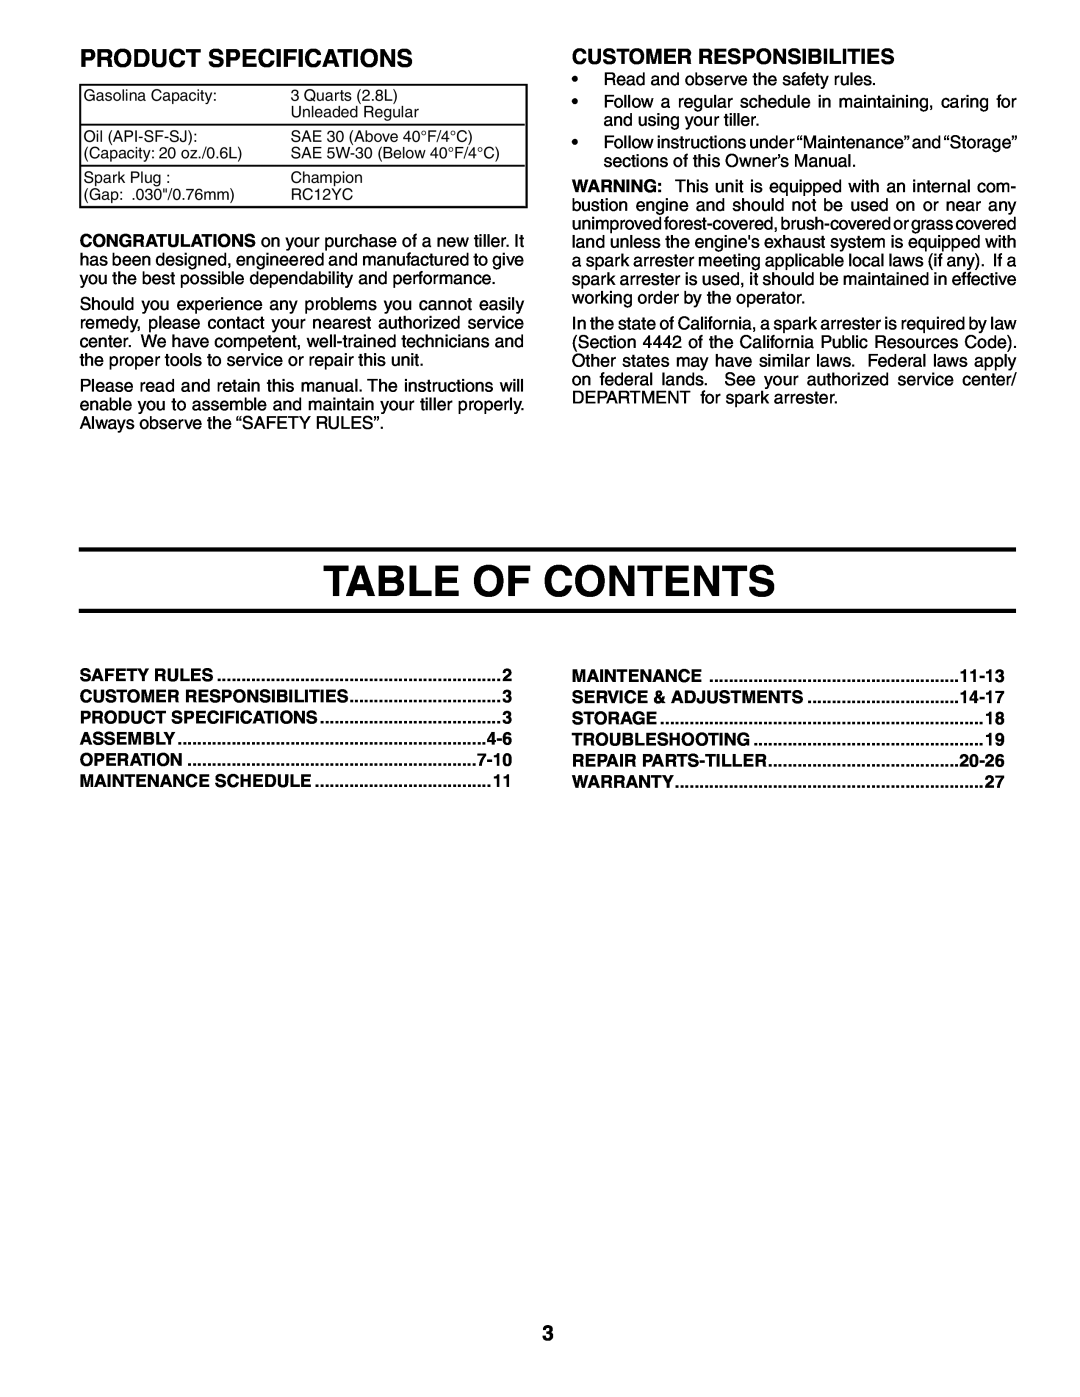 Poulan 188904 owner manual Table Of Contents, Product Specifications, Customer Responsibilities 